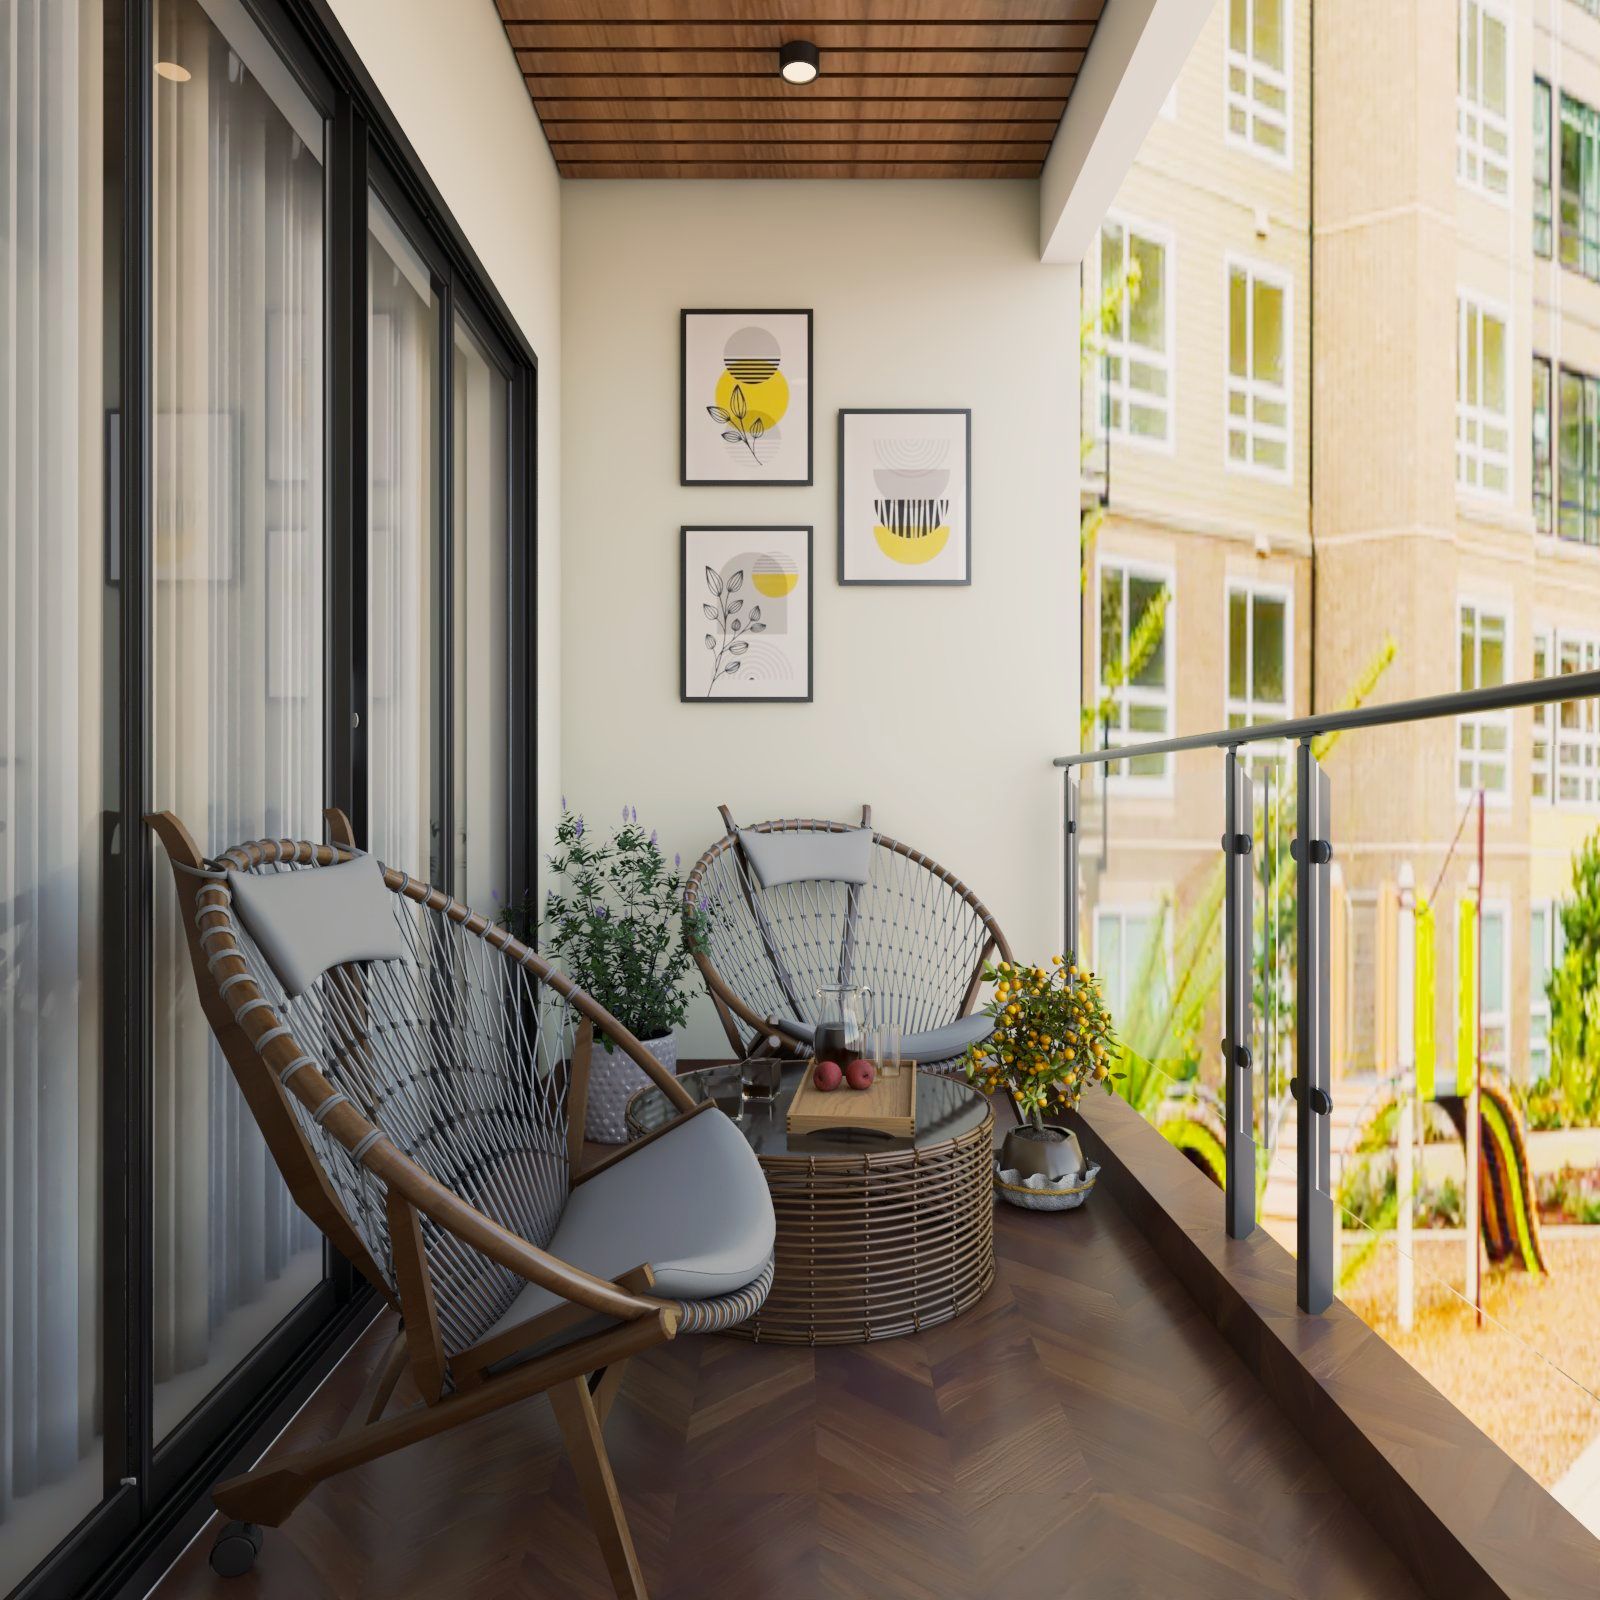 Tropical Balcony Design With Grey And Wood Cane Furniture